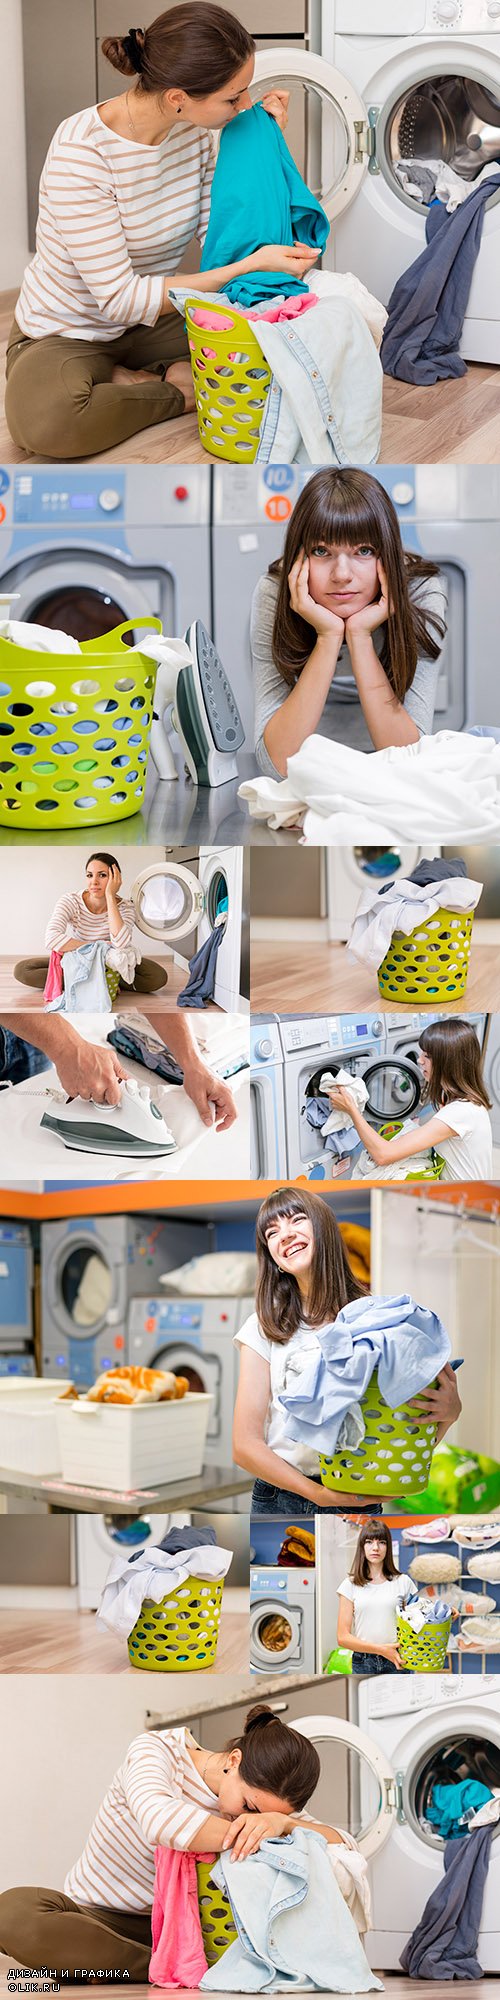 Young girl with laundry basket in laundry room